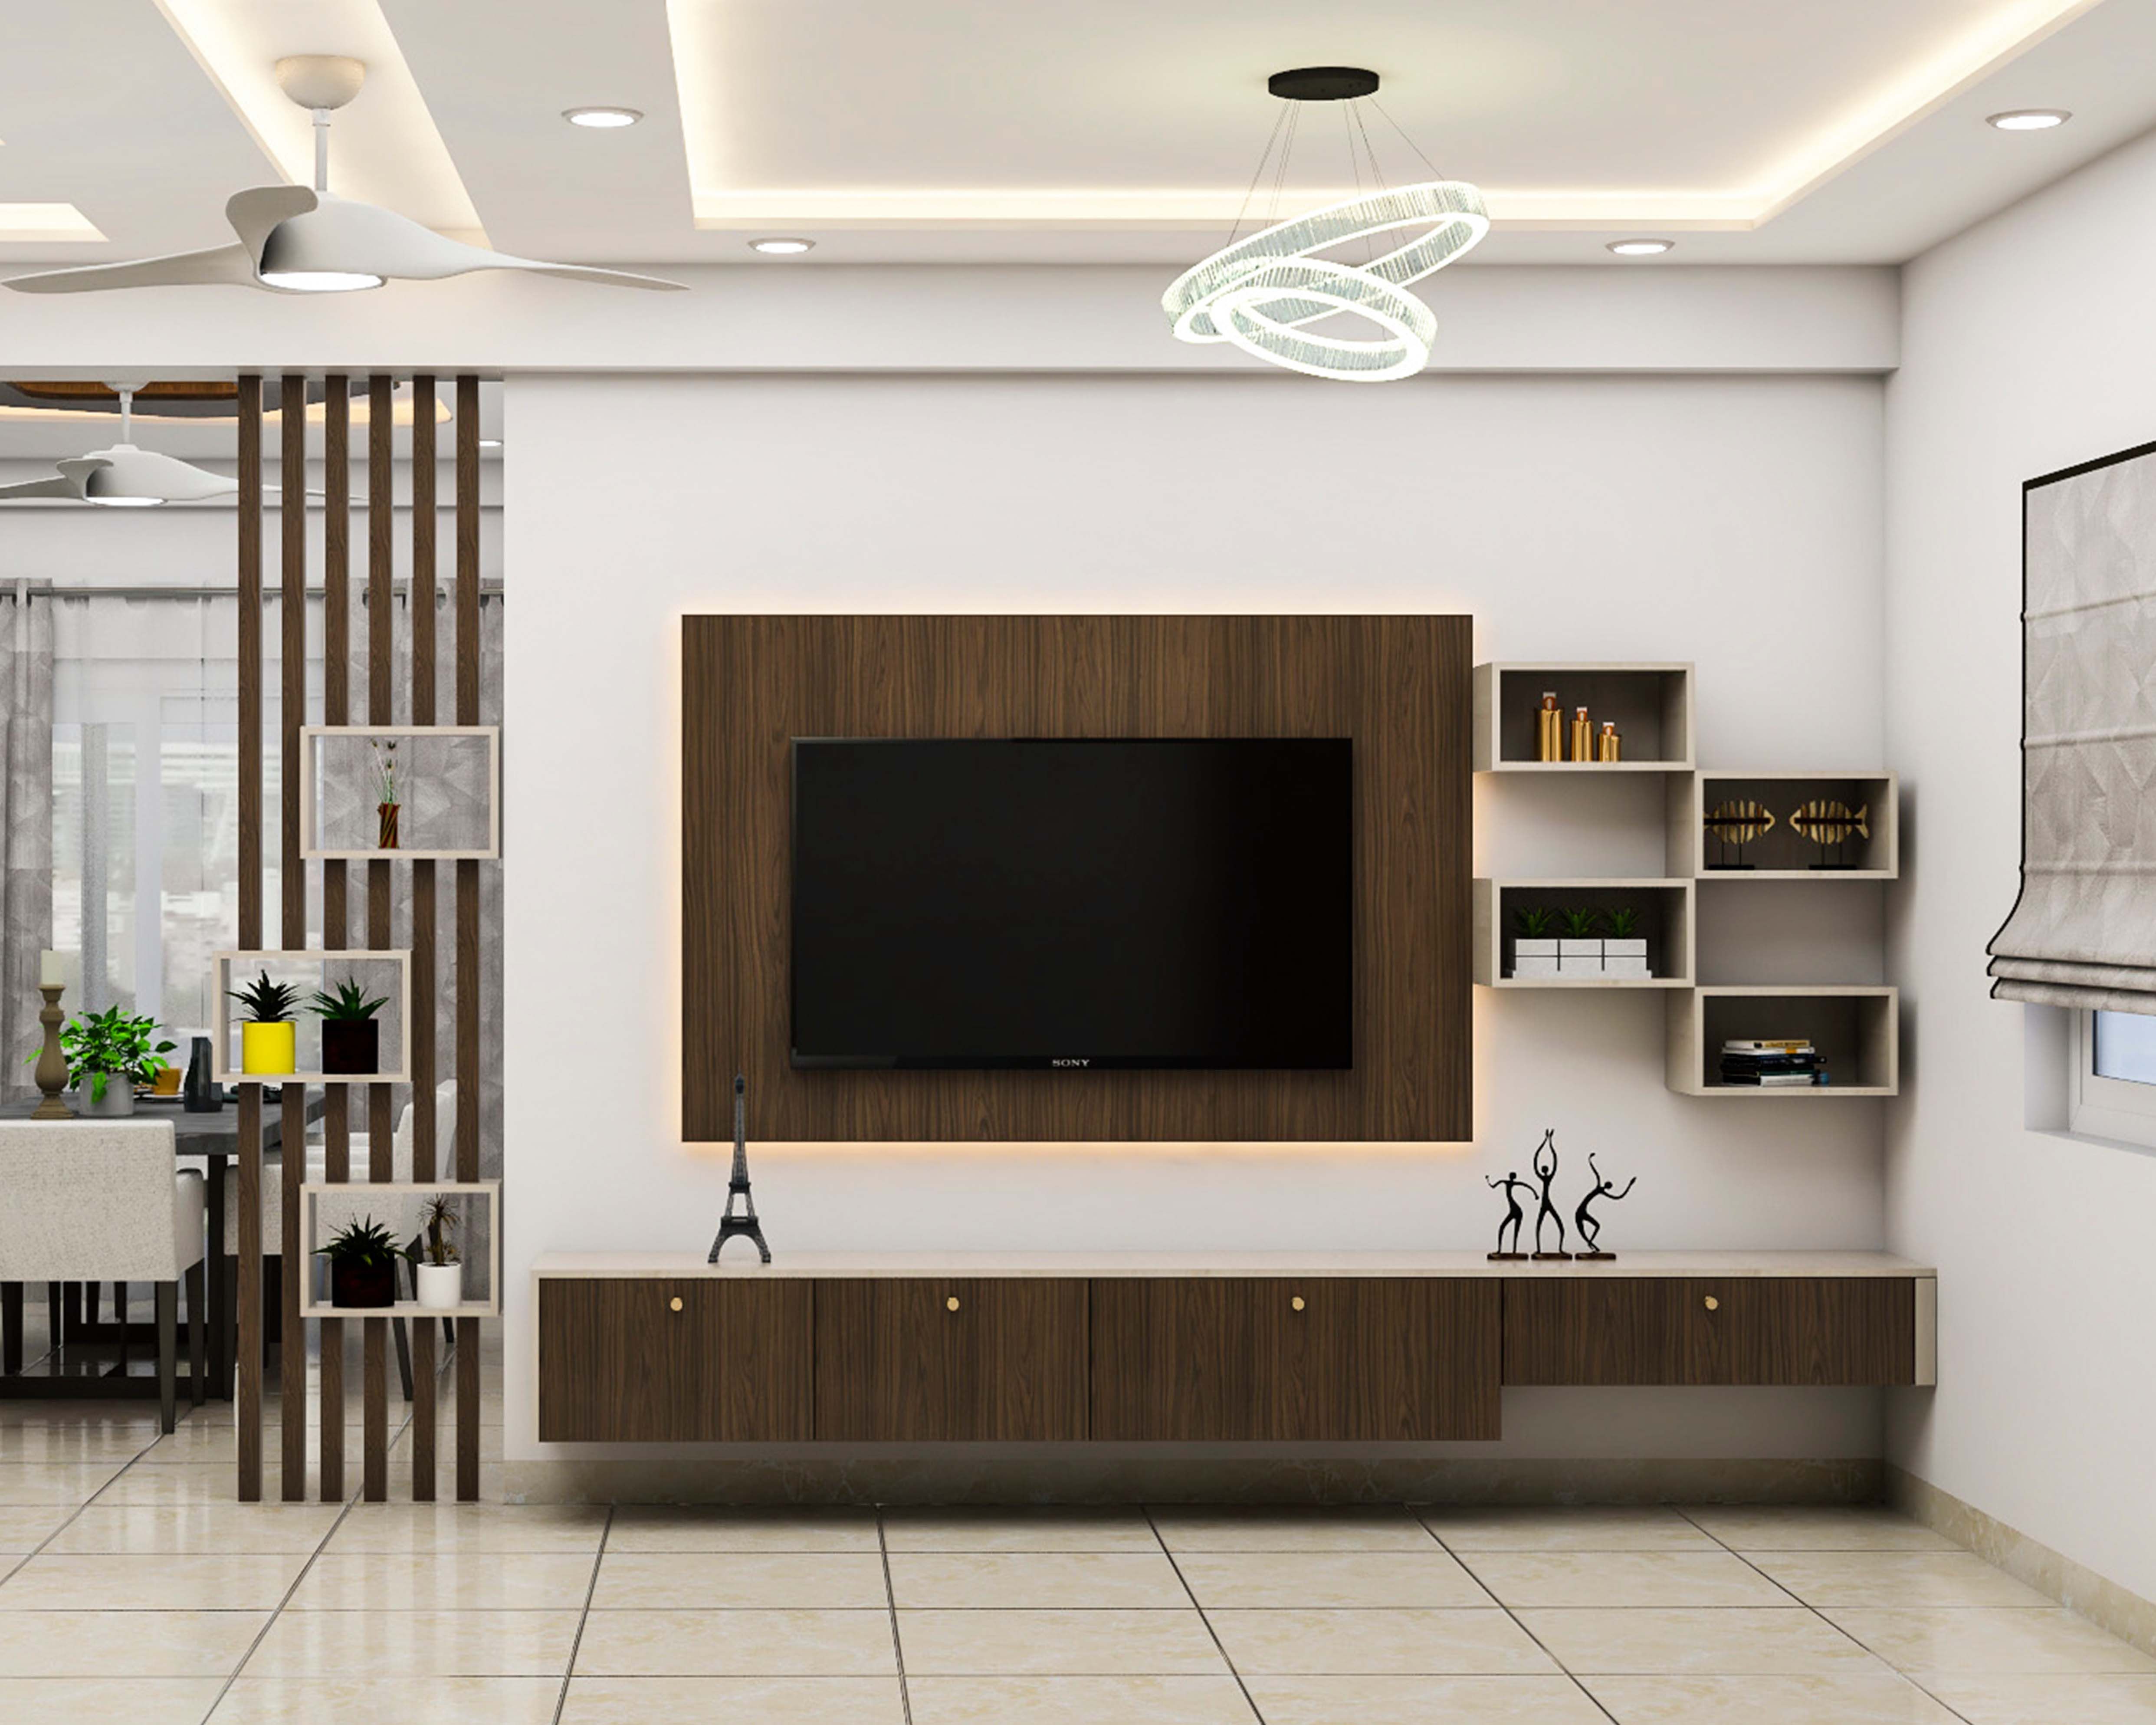 Traditional TV Unit Design With Wooden Panelling